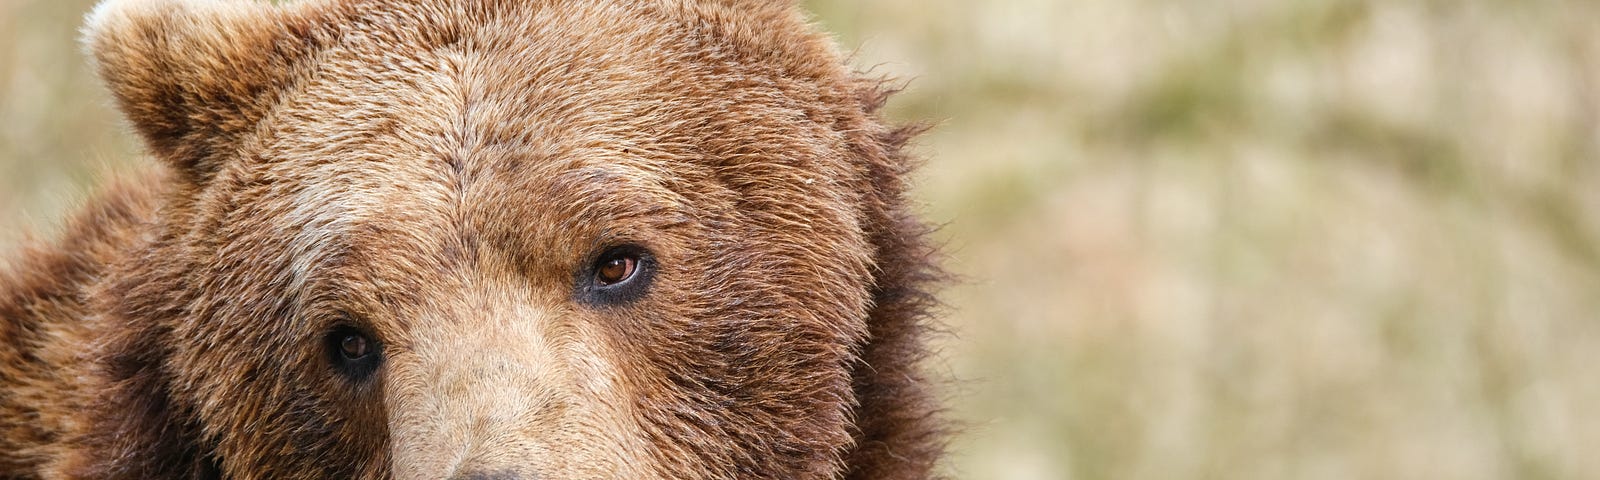 The Head of a large brown bear